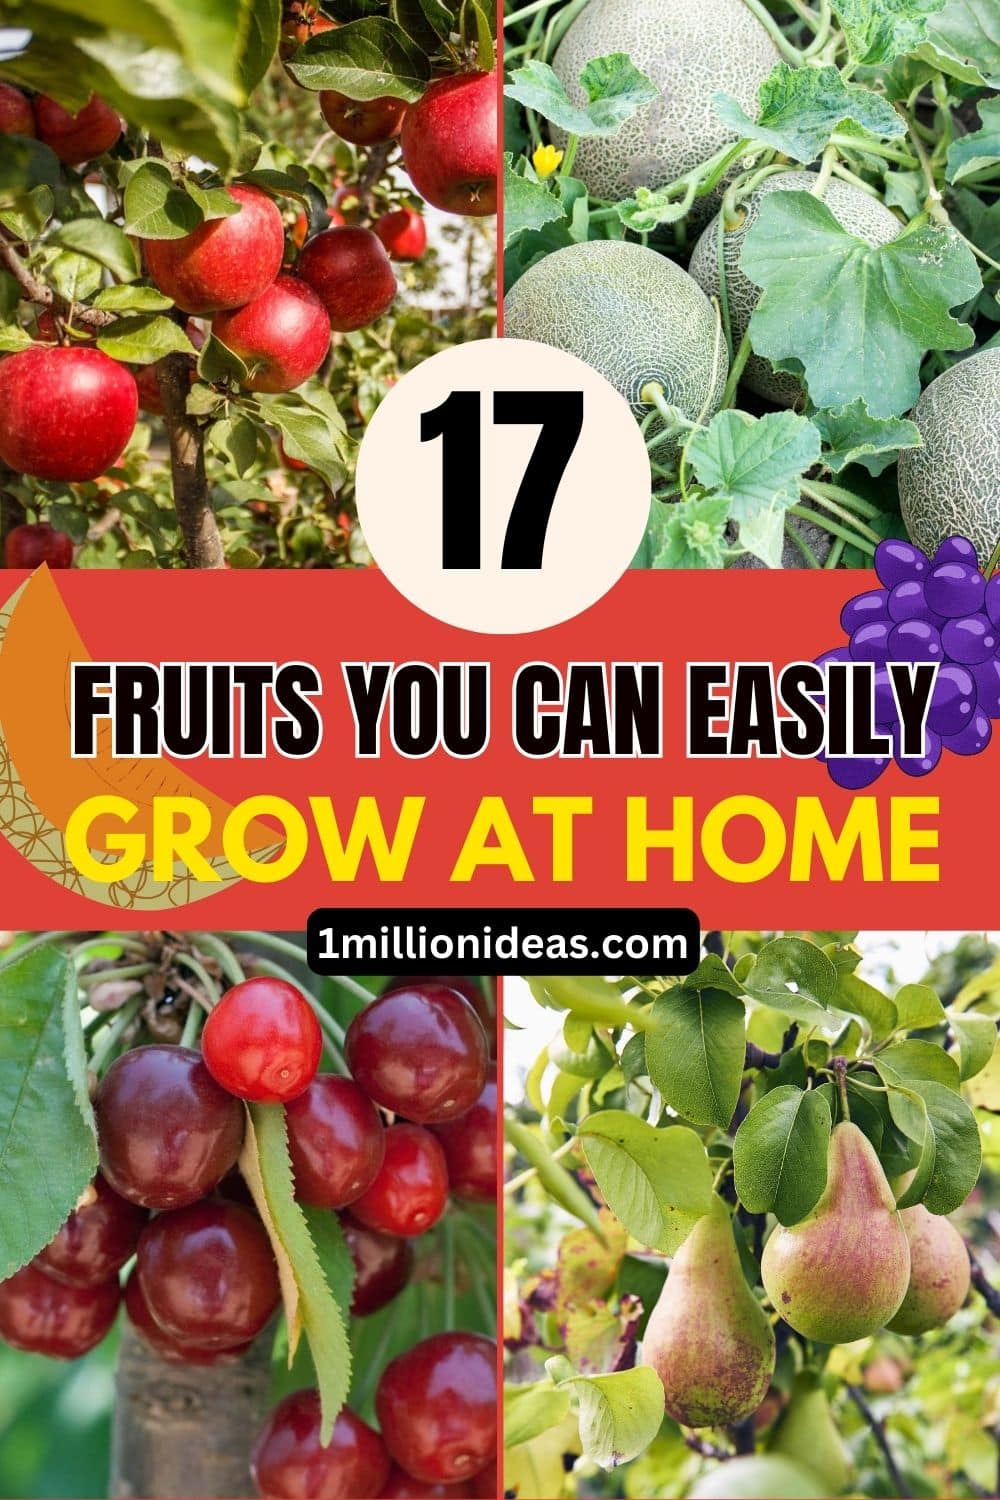 17 Fruits You Can Easily Grow At Home And Enjoy Fresh Produce - 113